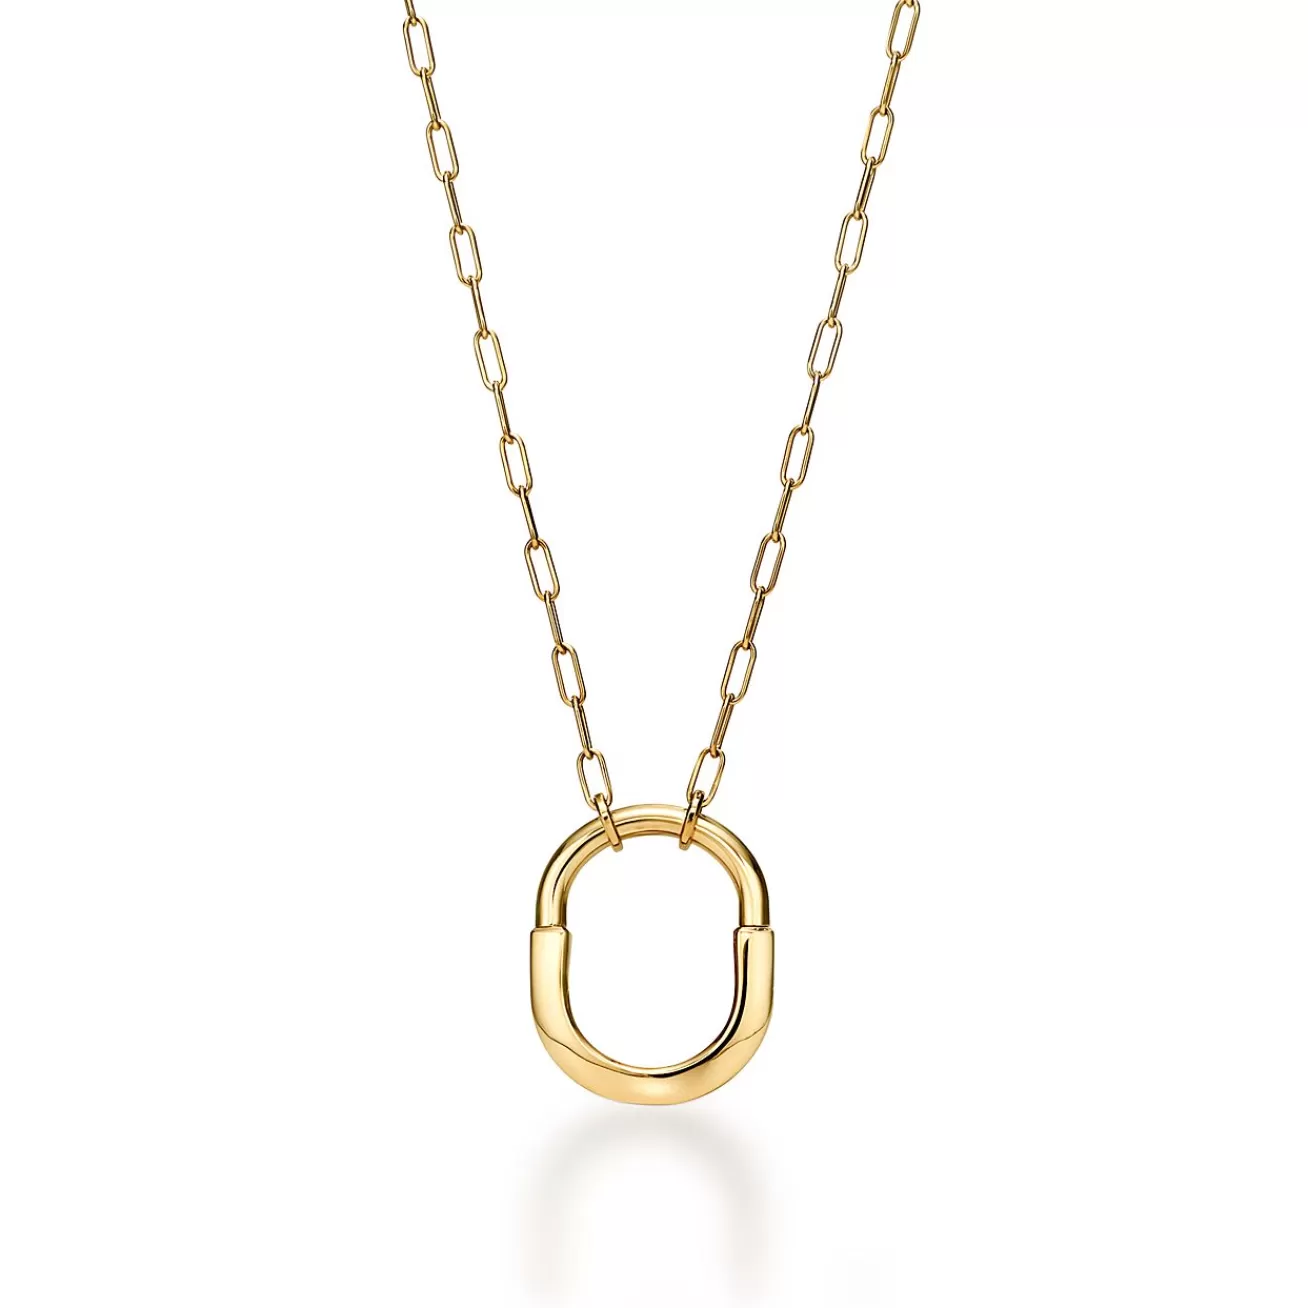 Tiffany & Co. Tiffany Lock Pendant in Yellow Gold, Medium | ^ Necklaces & Pendants | Gifts for Her